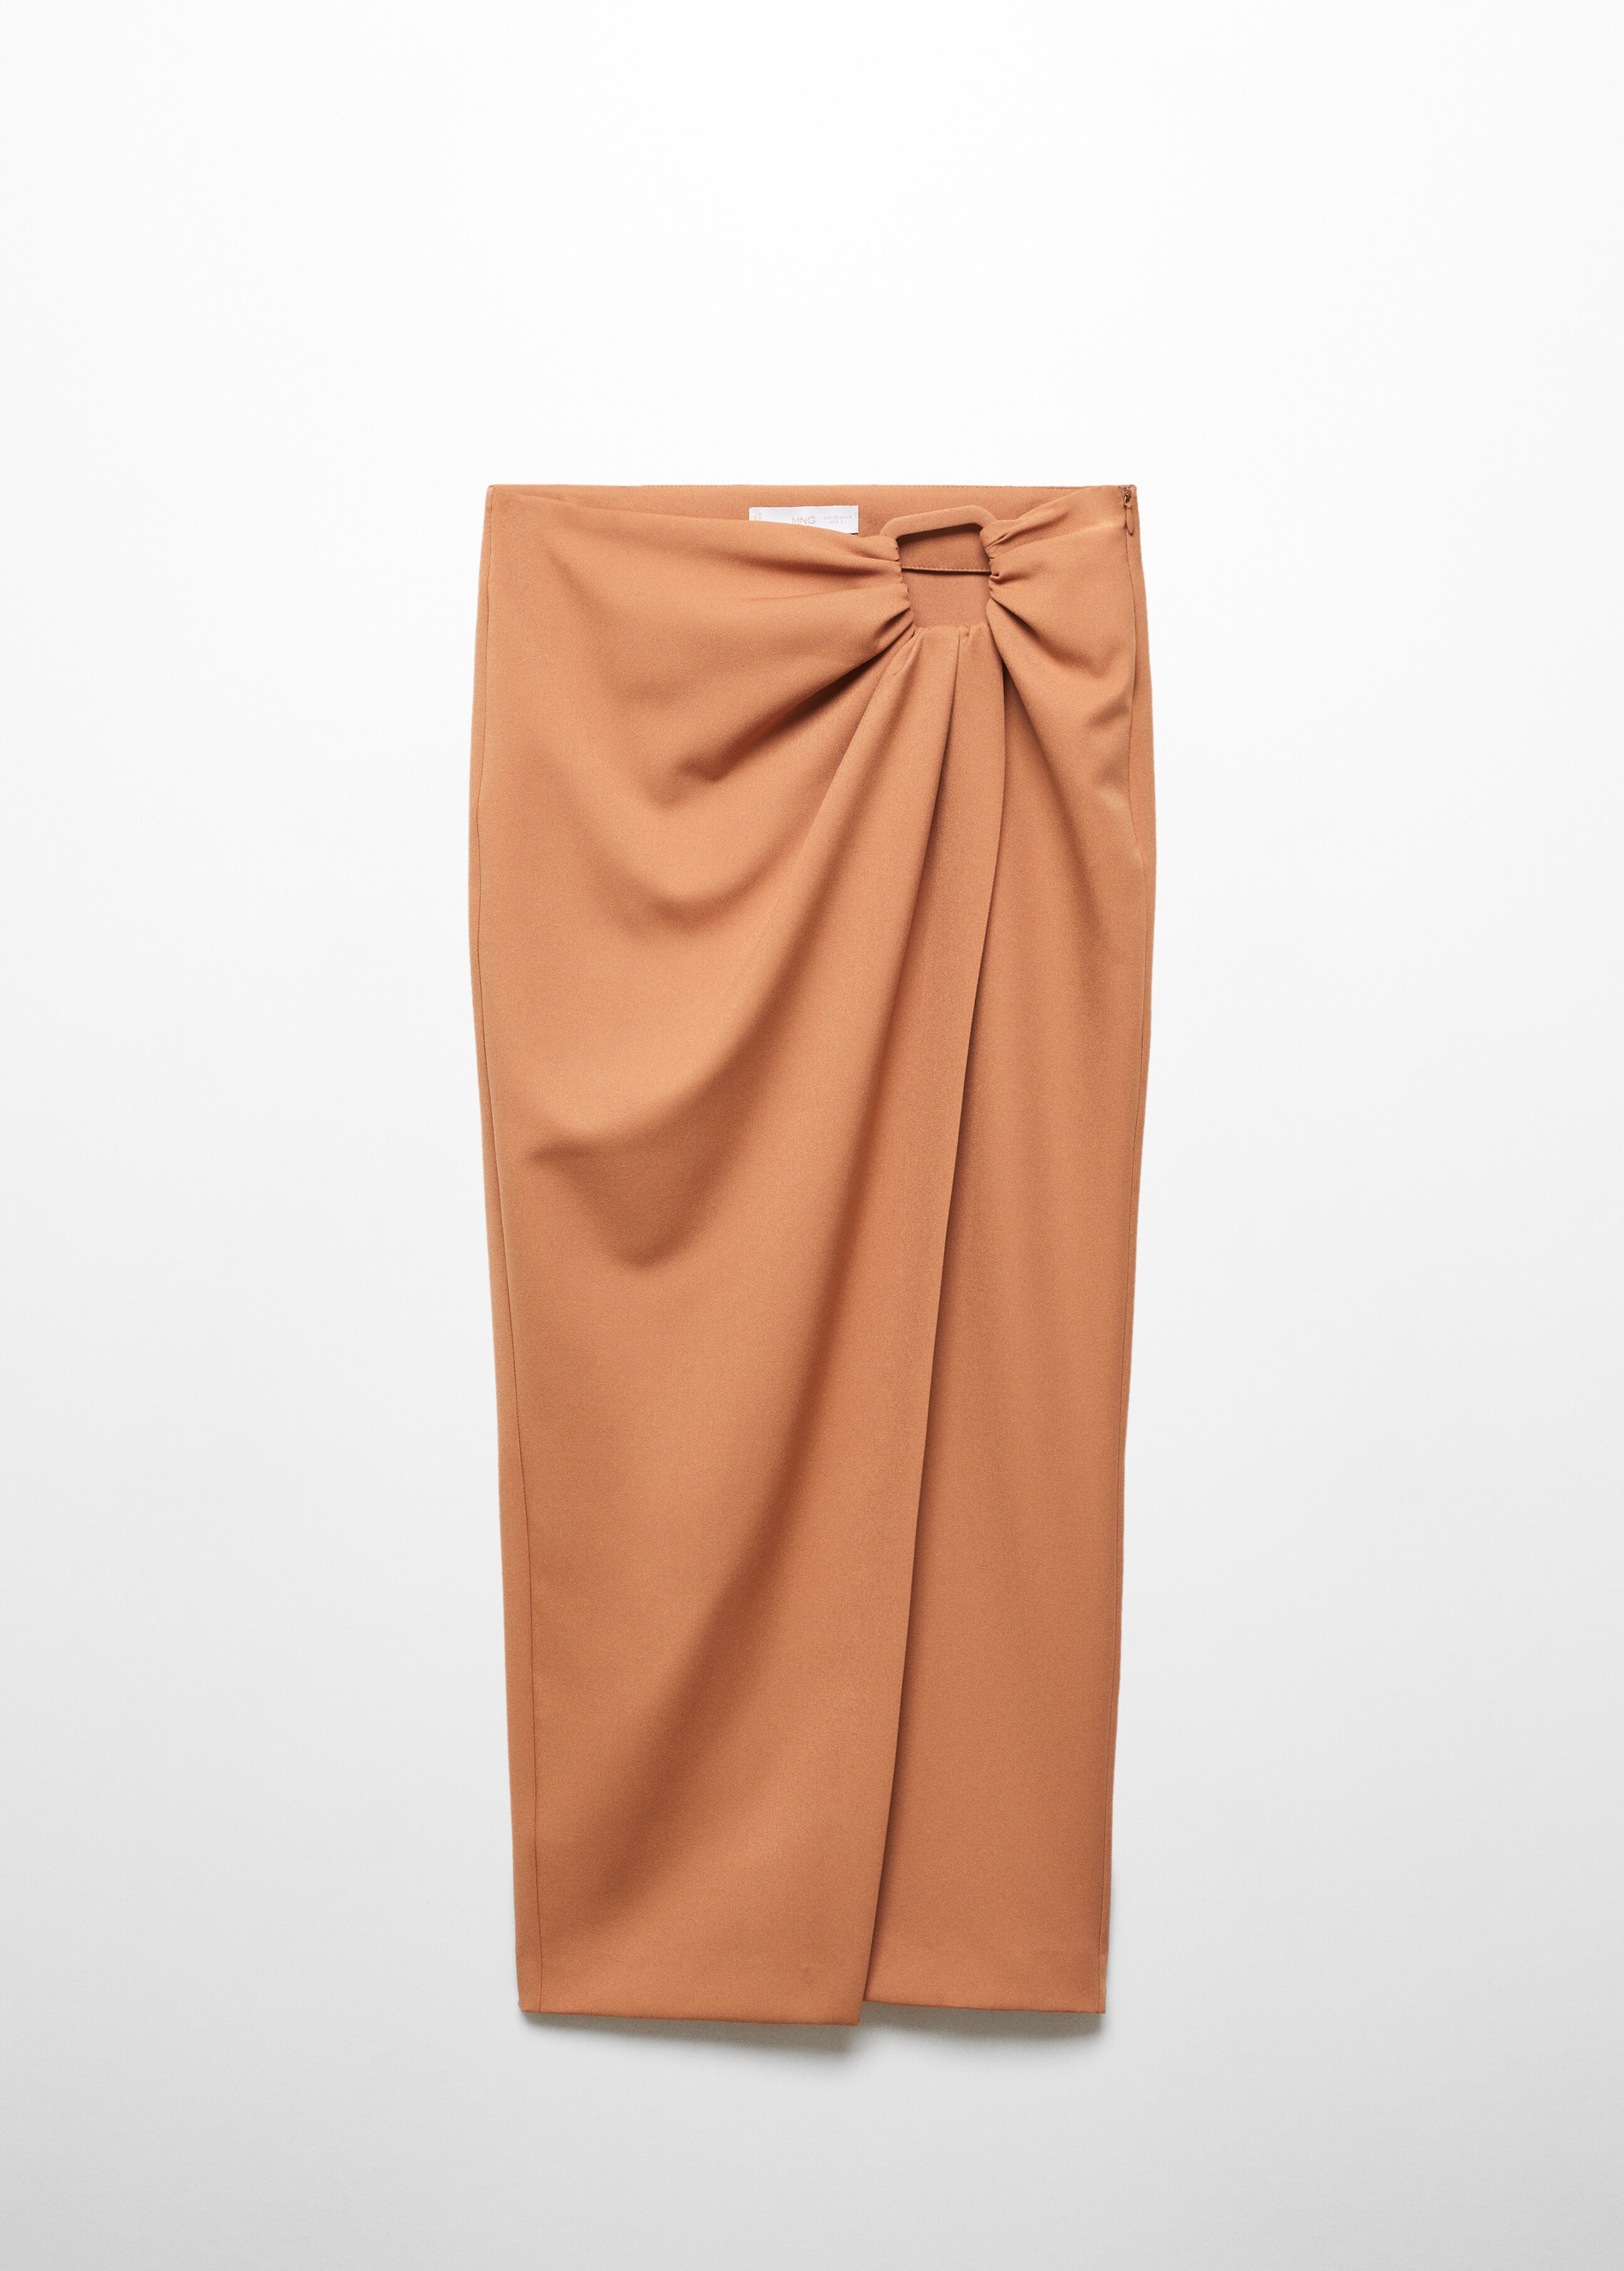 Wrap skirt with ruffled details - Article without model